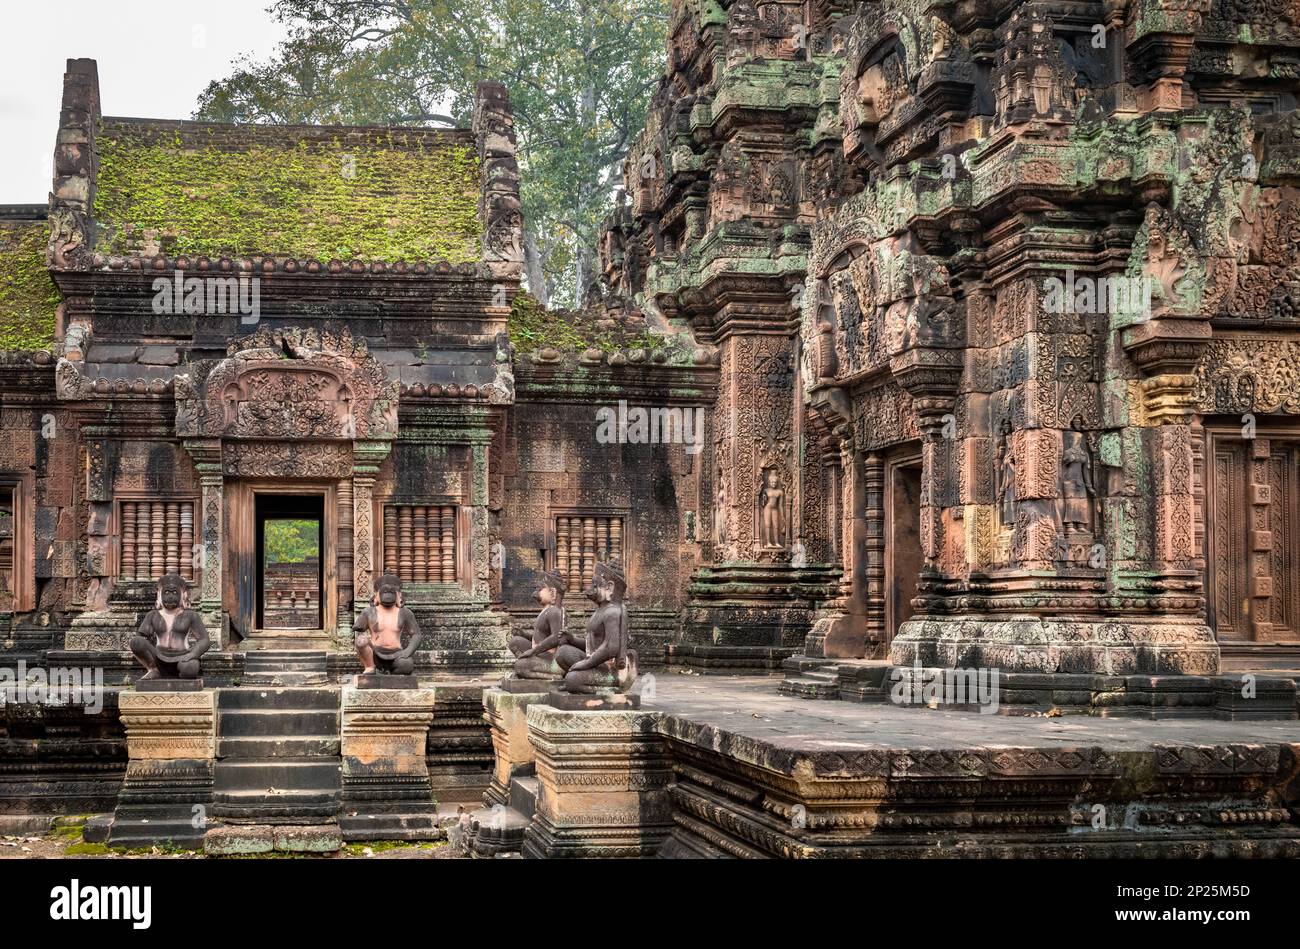 The inner compund of the elaborate 10th century Banteay Srey temple within the Angkor area near Siem Reap in Cambodia. Stock Photo